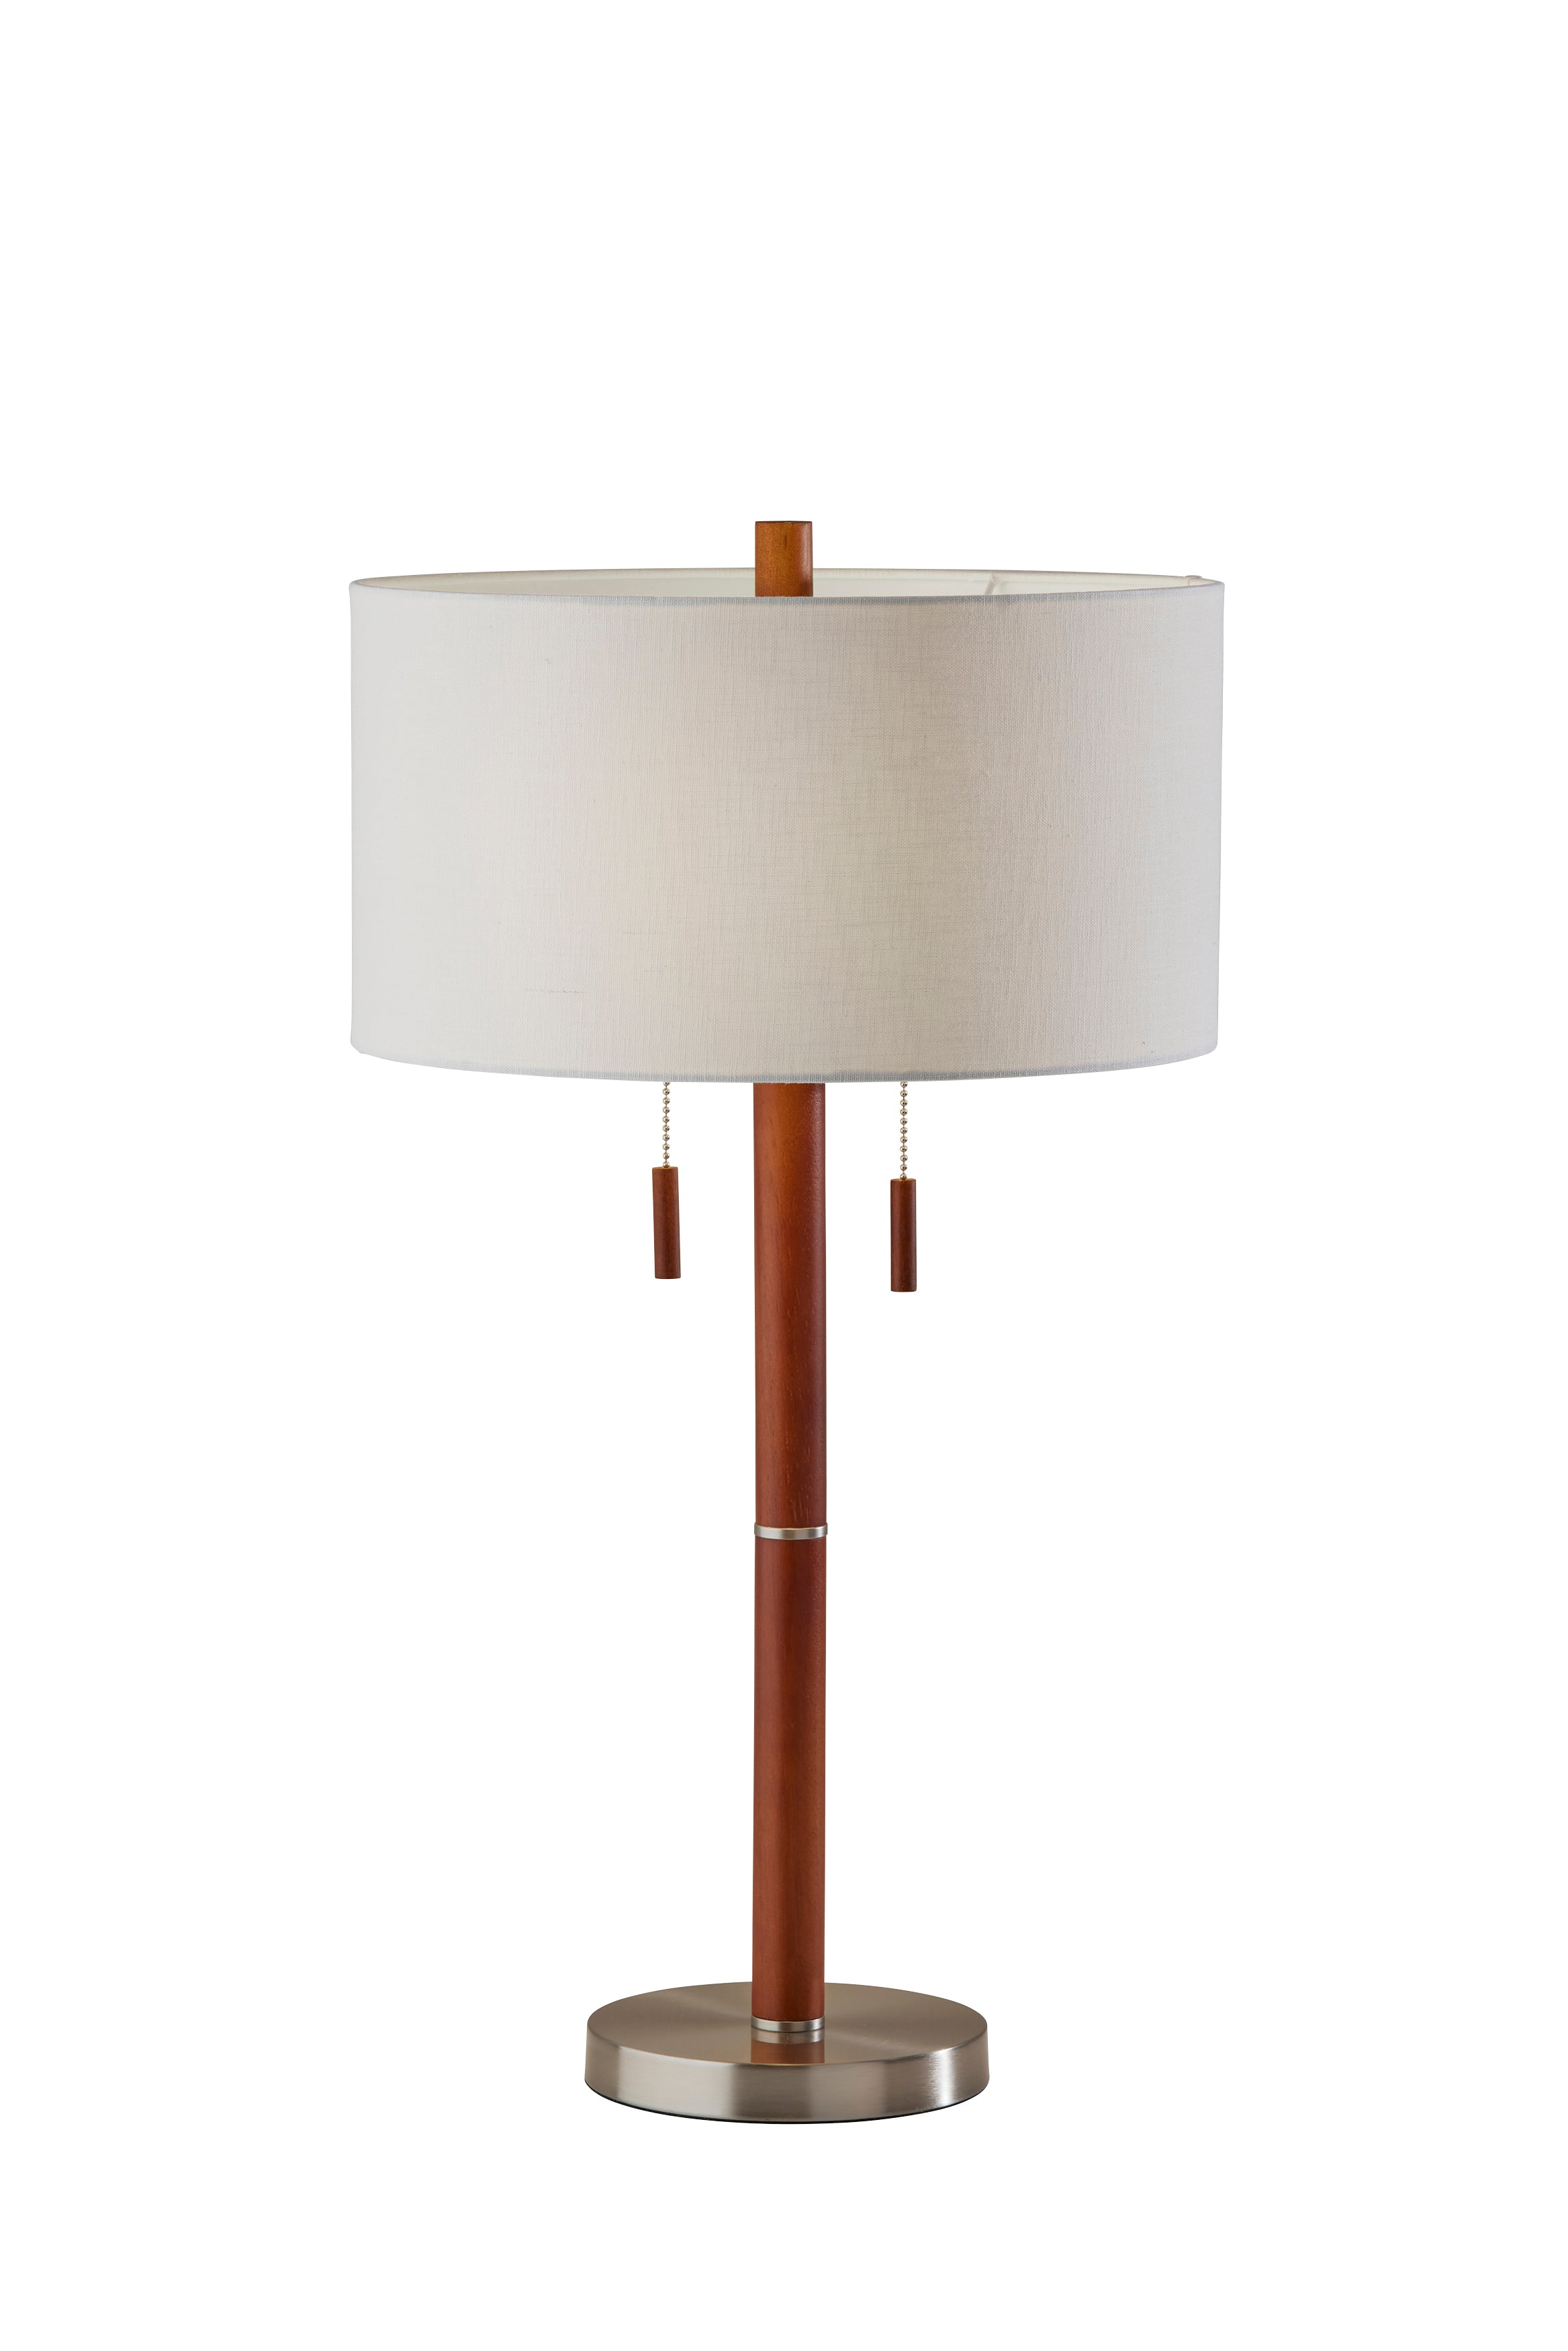 MADELINE Table lamp Wood, Stainless steel - 3374-15 | ADESSO